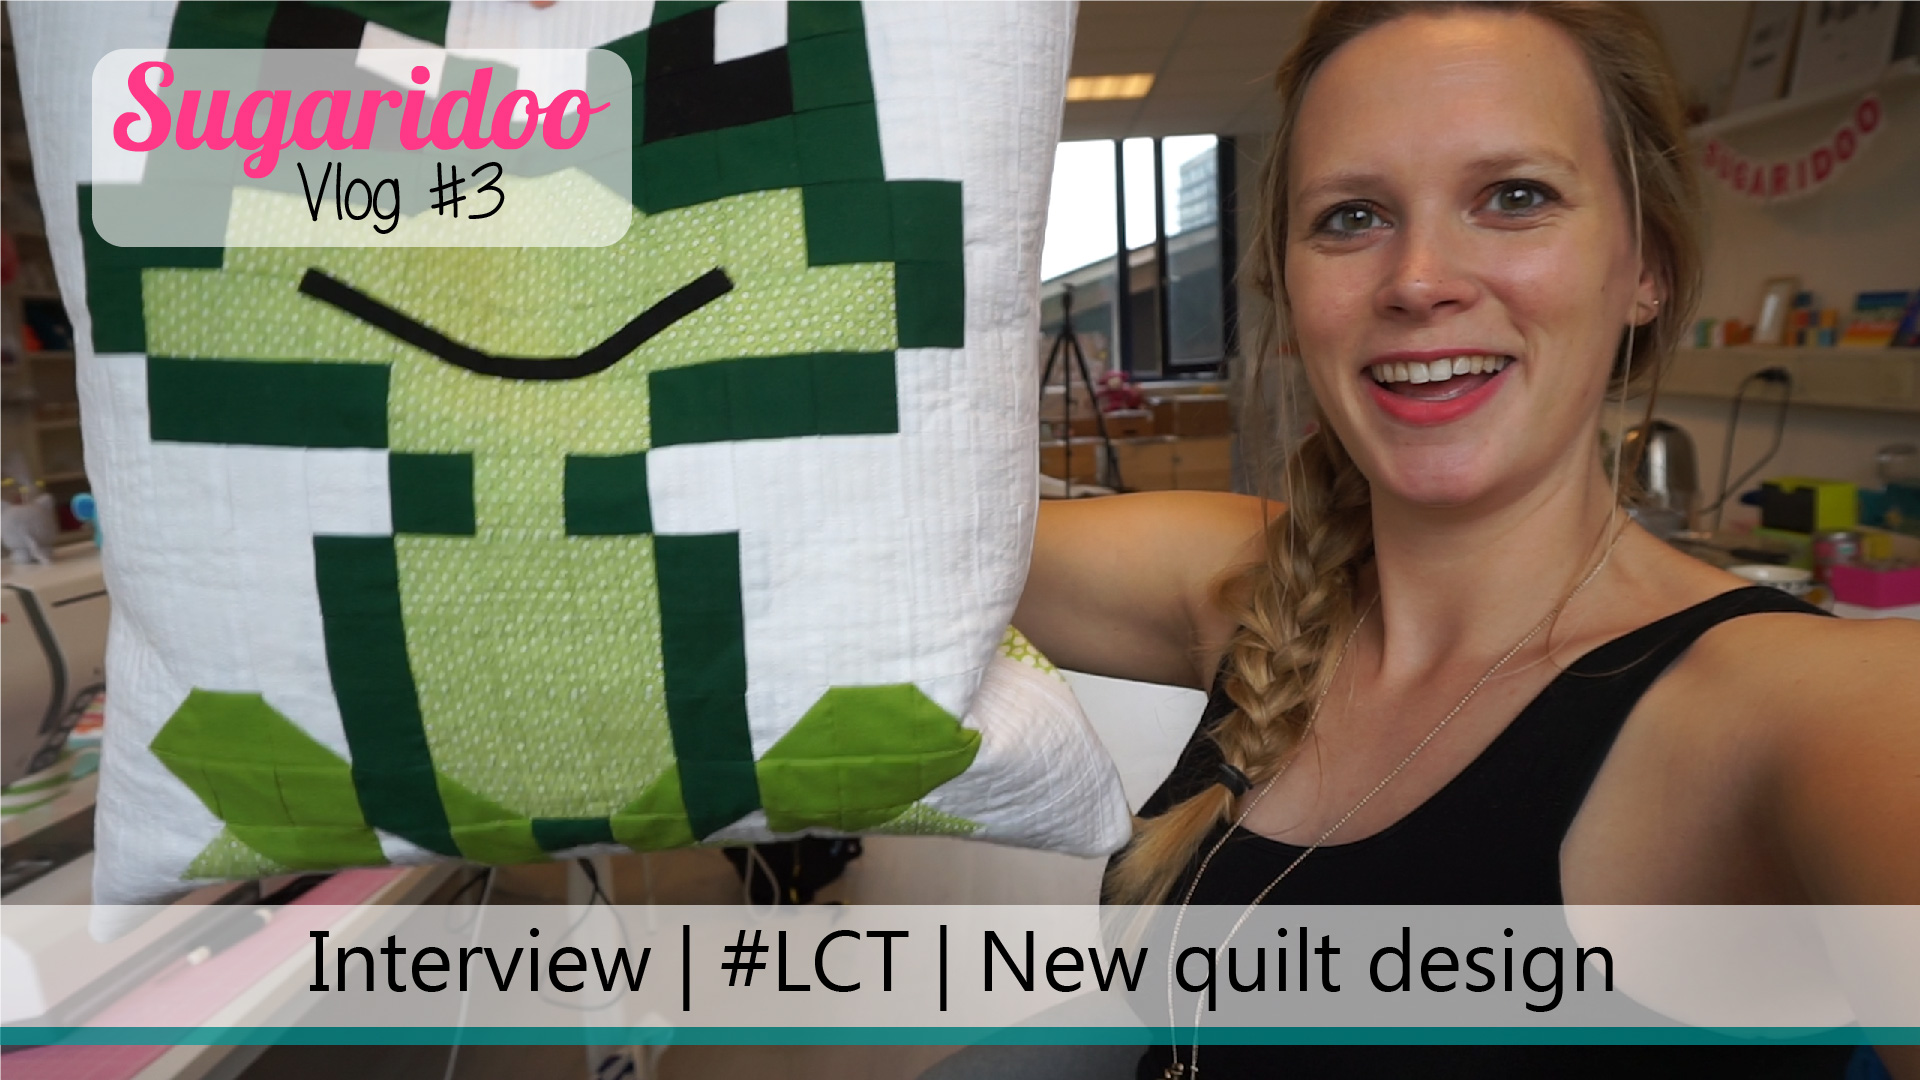 Vlog #3 | Special guests in the studio & new quilt design